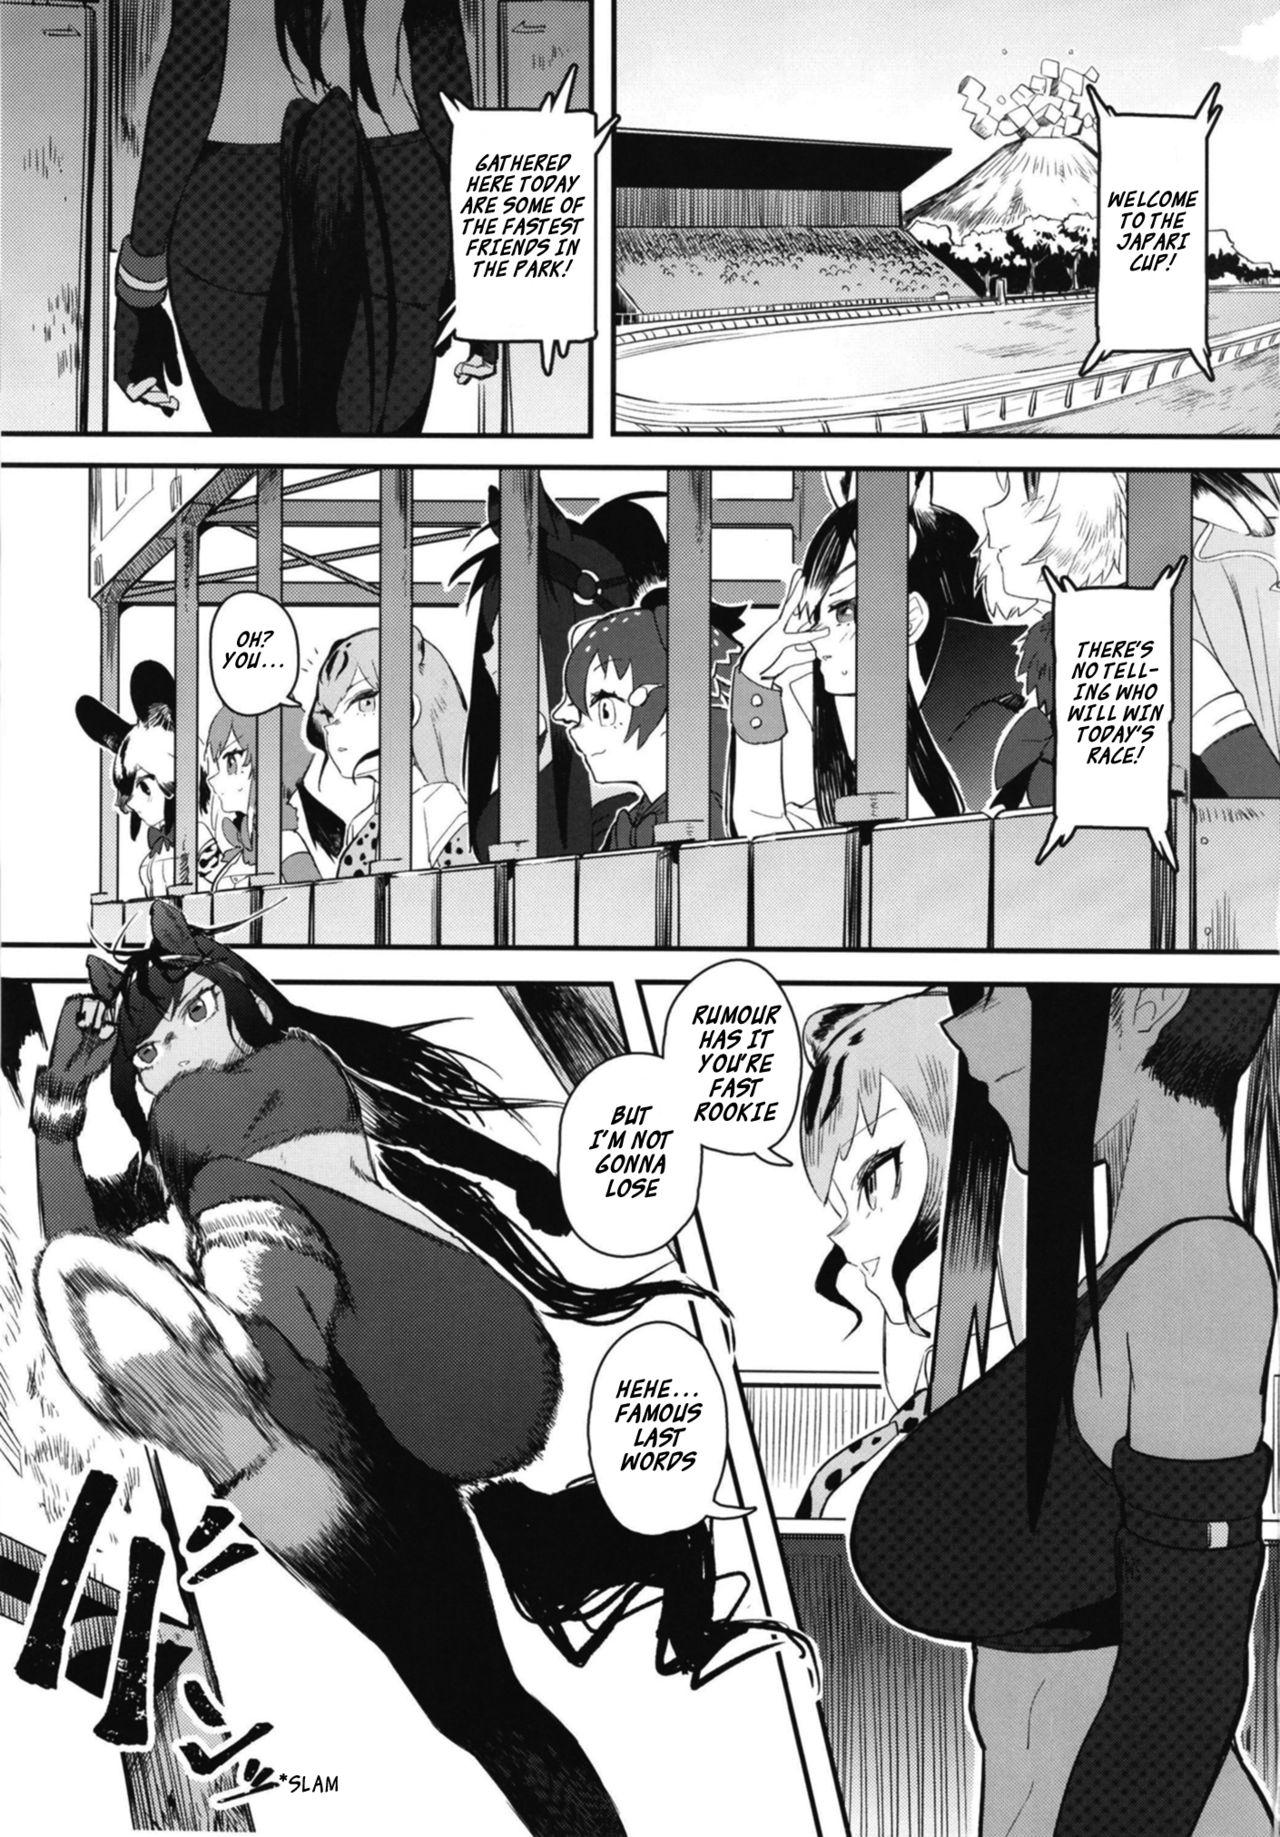 Free Blowjob Thoroughbred Early Days 2 - Kemono friends Best Blow Job - Page 3